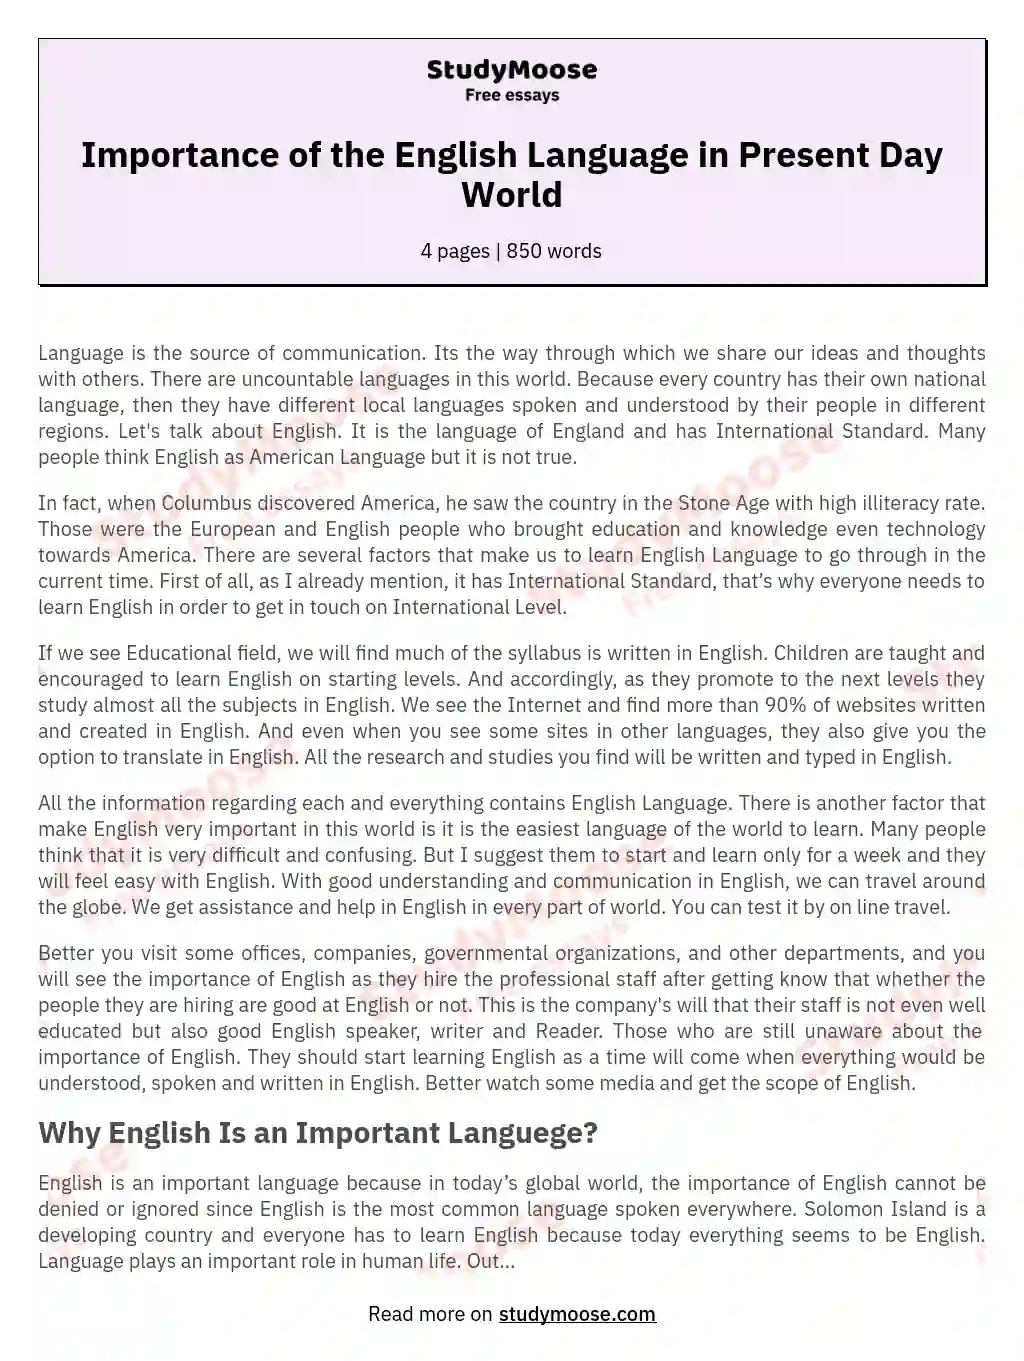 Importance of the English Language in Present Day World essay